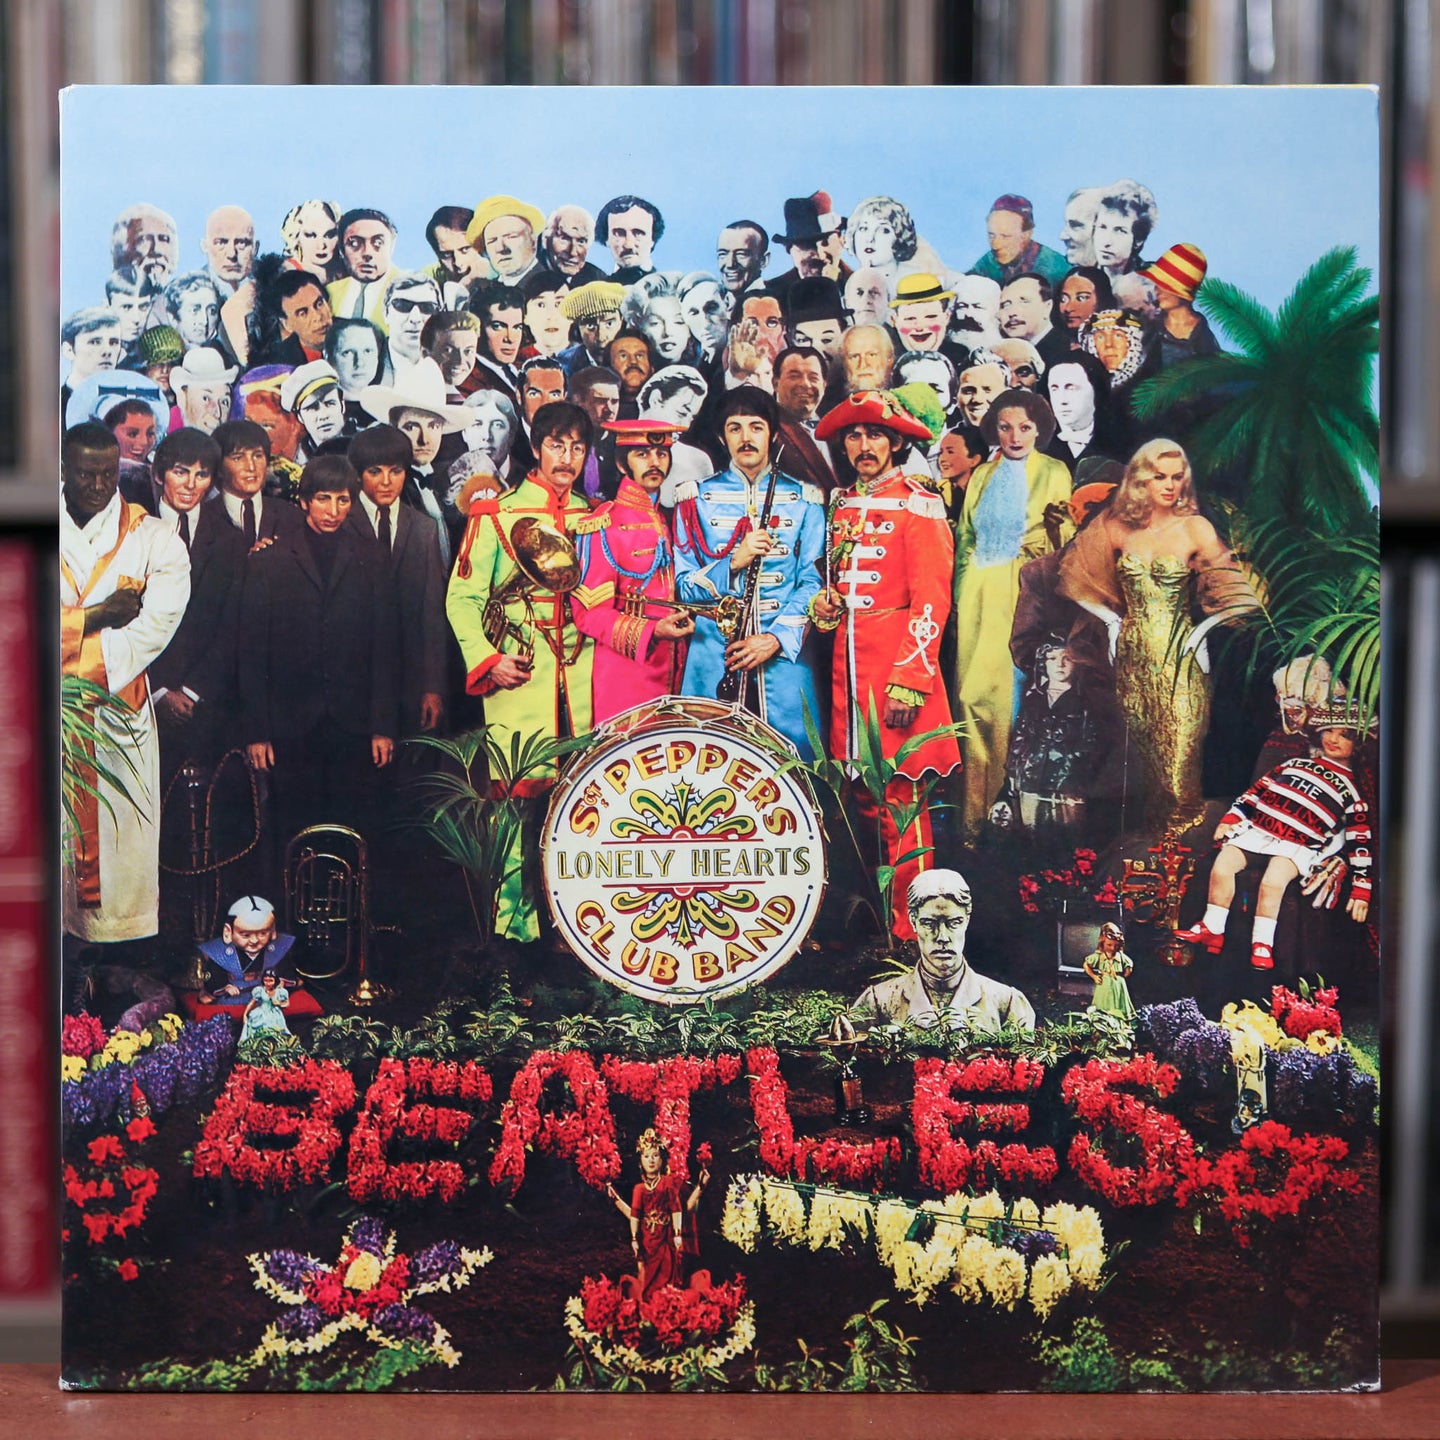 The Beatles - Sgt. Peppers - UK Import - 2012 Parlophone, VG++/VG+